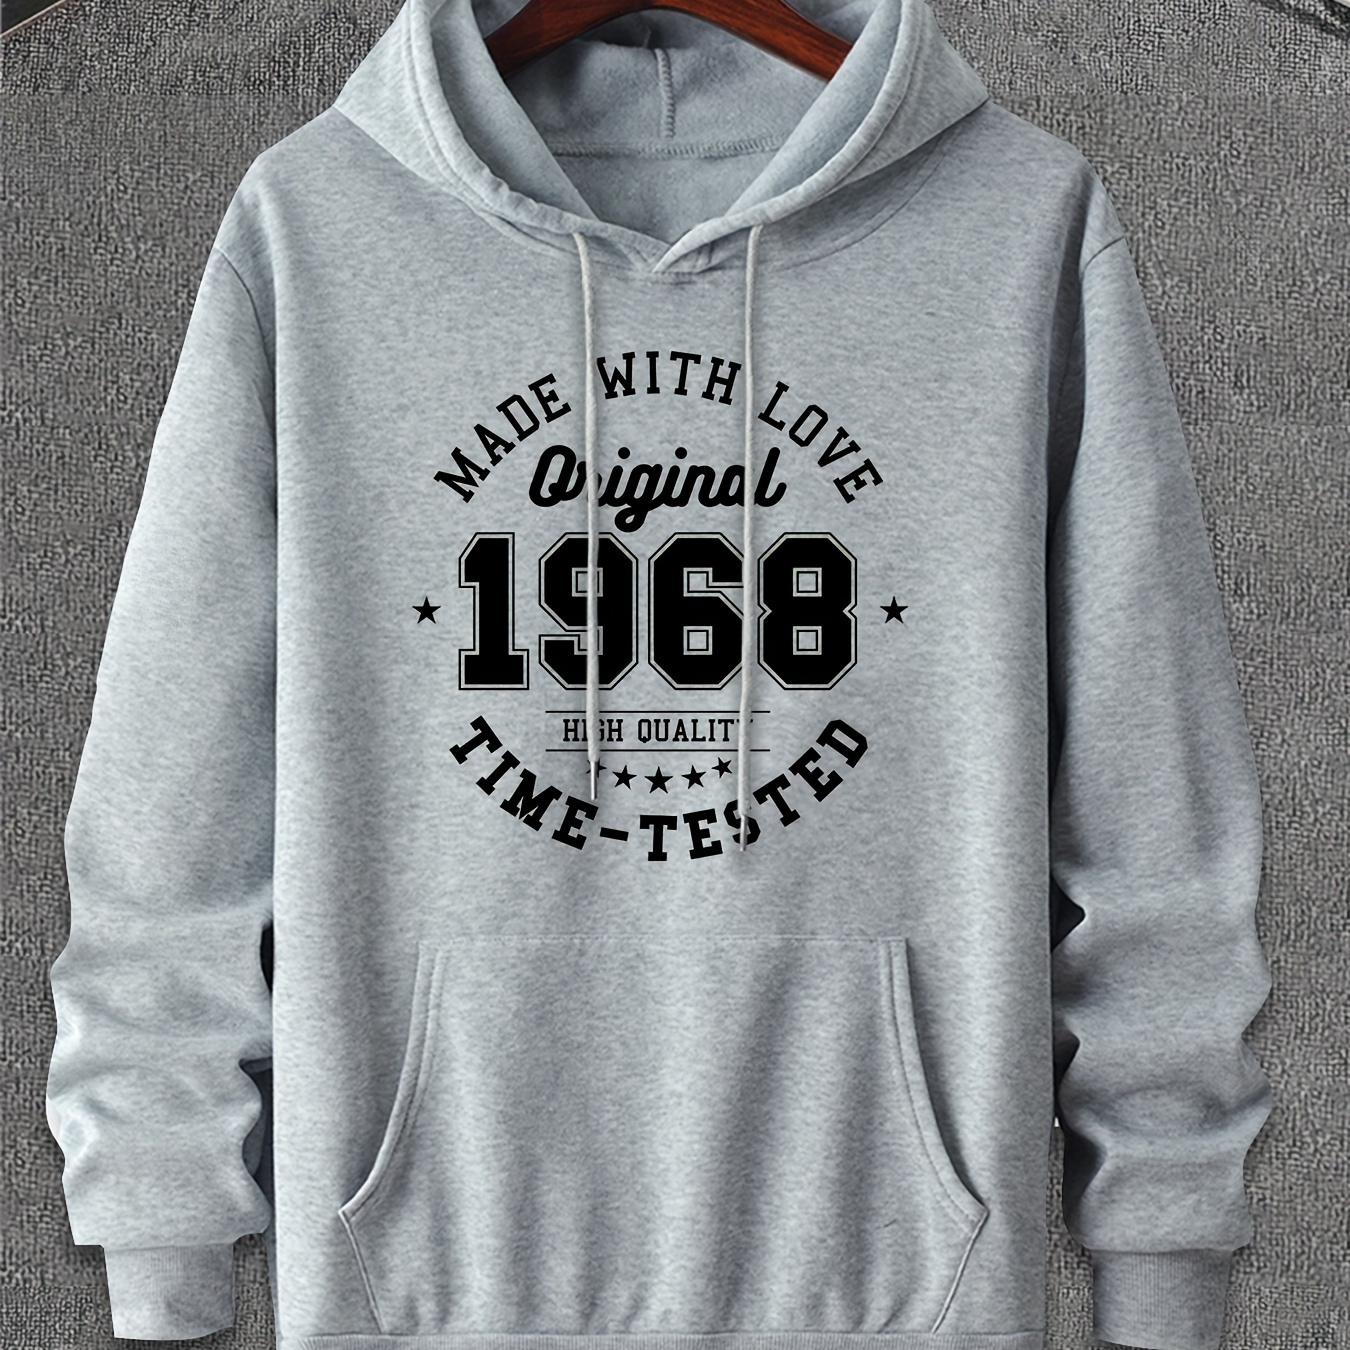 

1968 Pattern, Men's Trendy Comfy Hoodie, Casual Slightly Stretch Breathable Hooded Sweatshirt For Outdoor